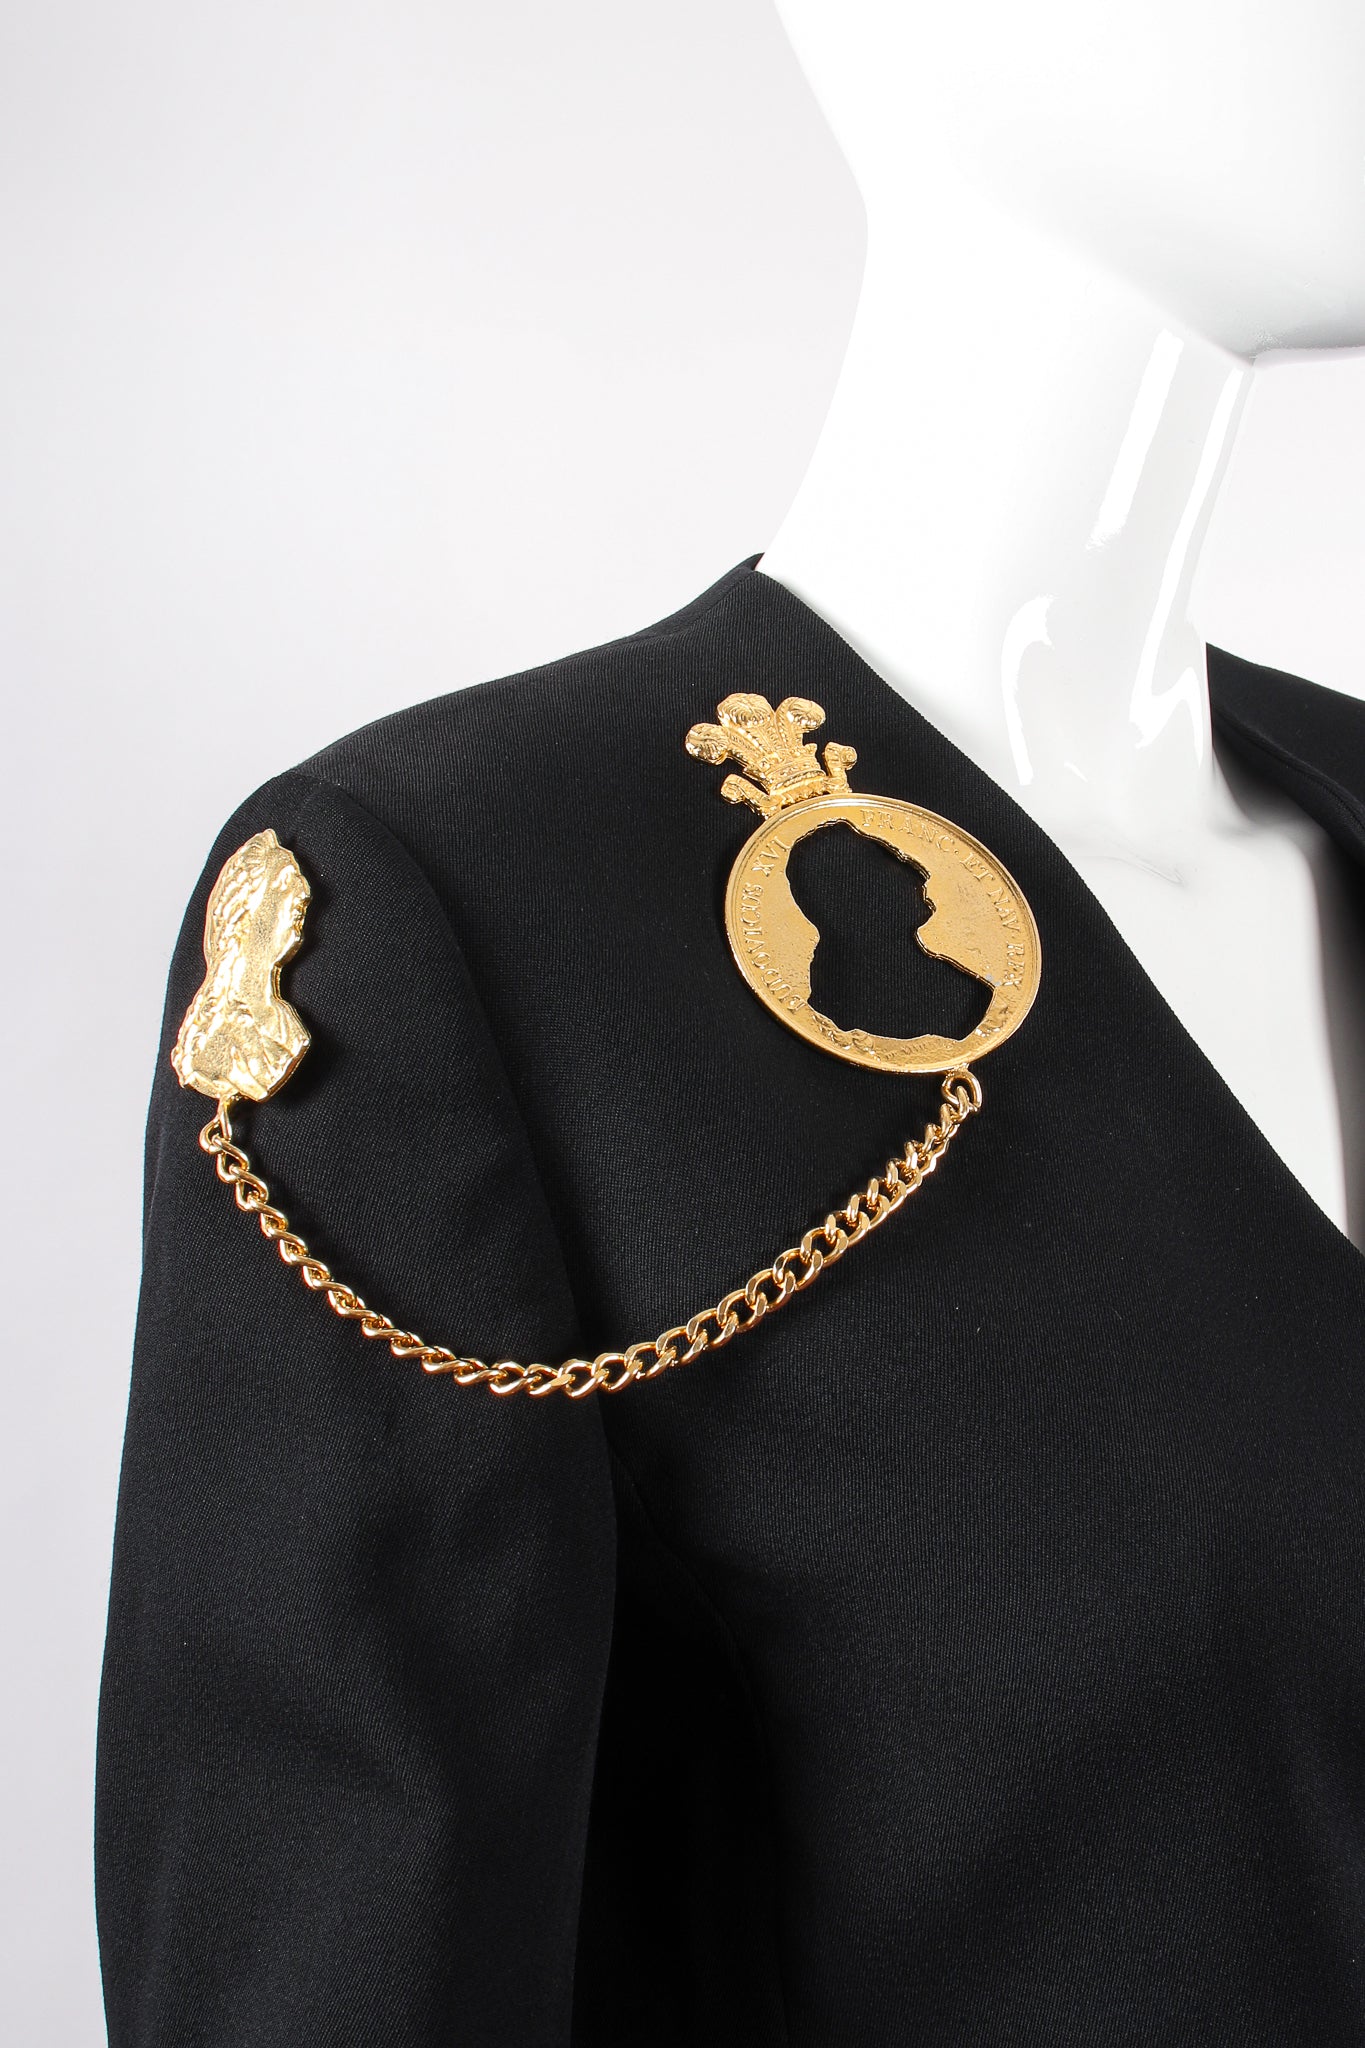 Vintage Marla Buck Silhouette Coin Cutout Chain Brooch on Mannequin at Recess Los Angeles